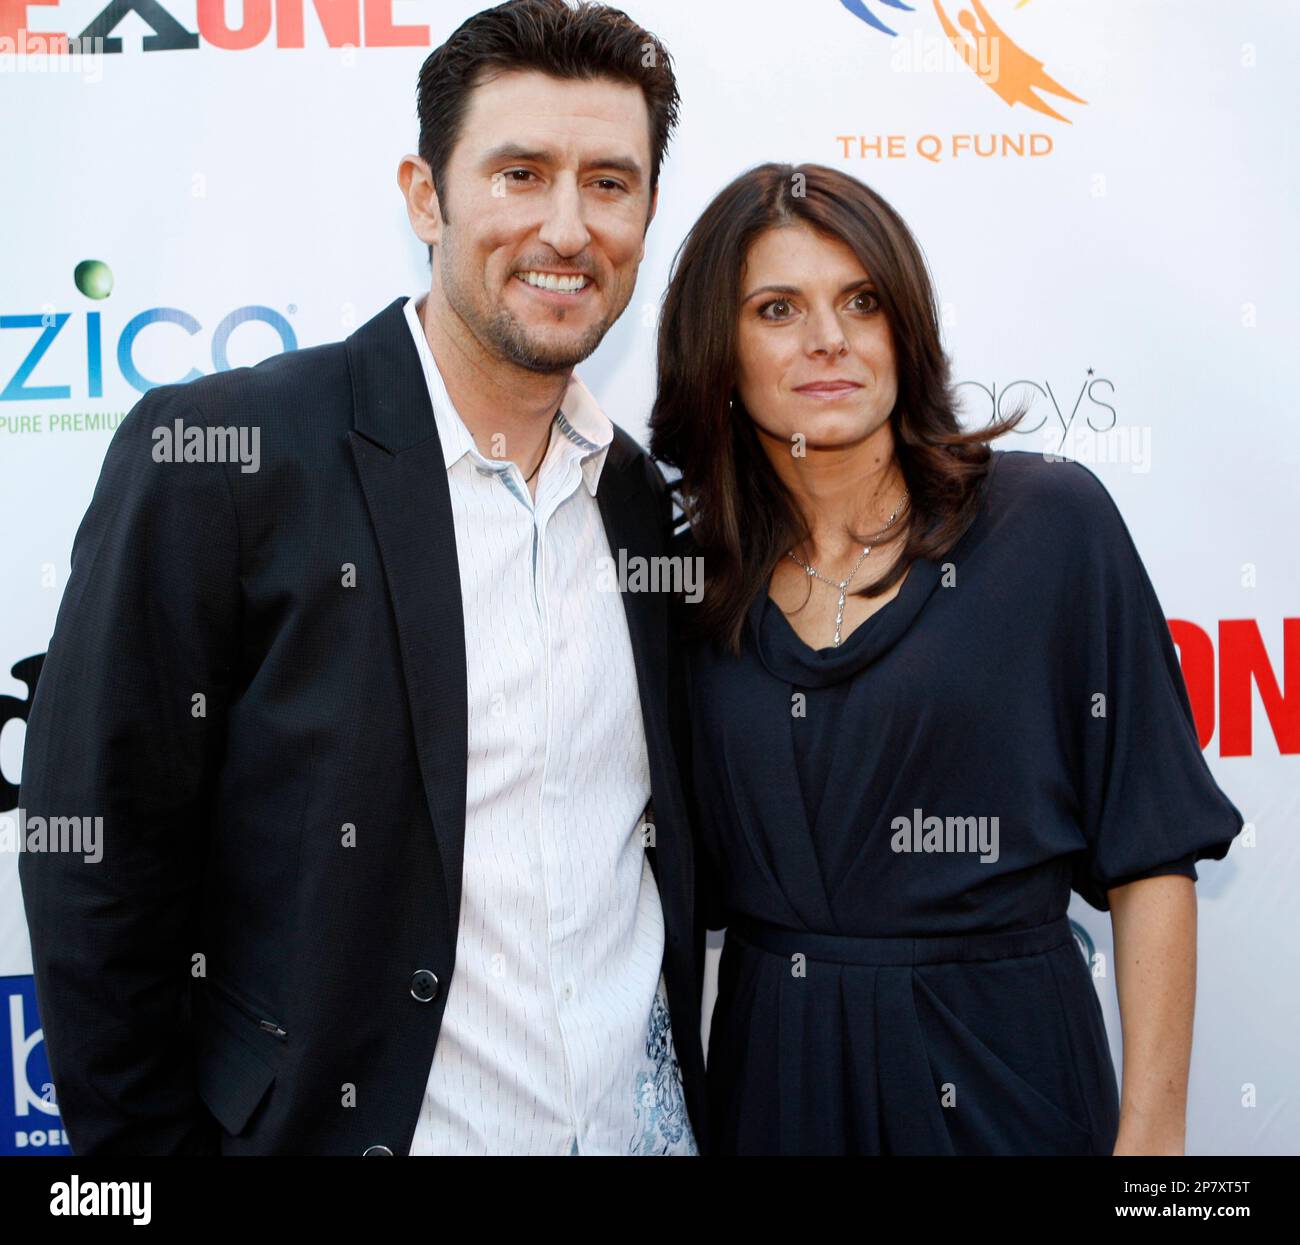 Nomar Garciaparra and Mia Hamm arrive at the ONEXONE Foundation's 2nd  Annual Fundraiser Thursday, Oct. 22, 2009, in San Francisco. ONEXONE is a  charitable organization committed to fighting health issues and preserving